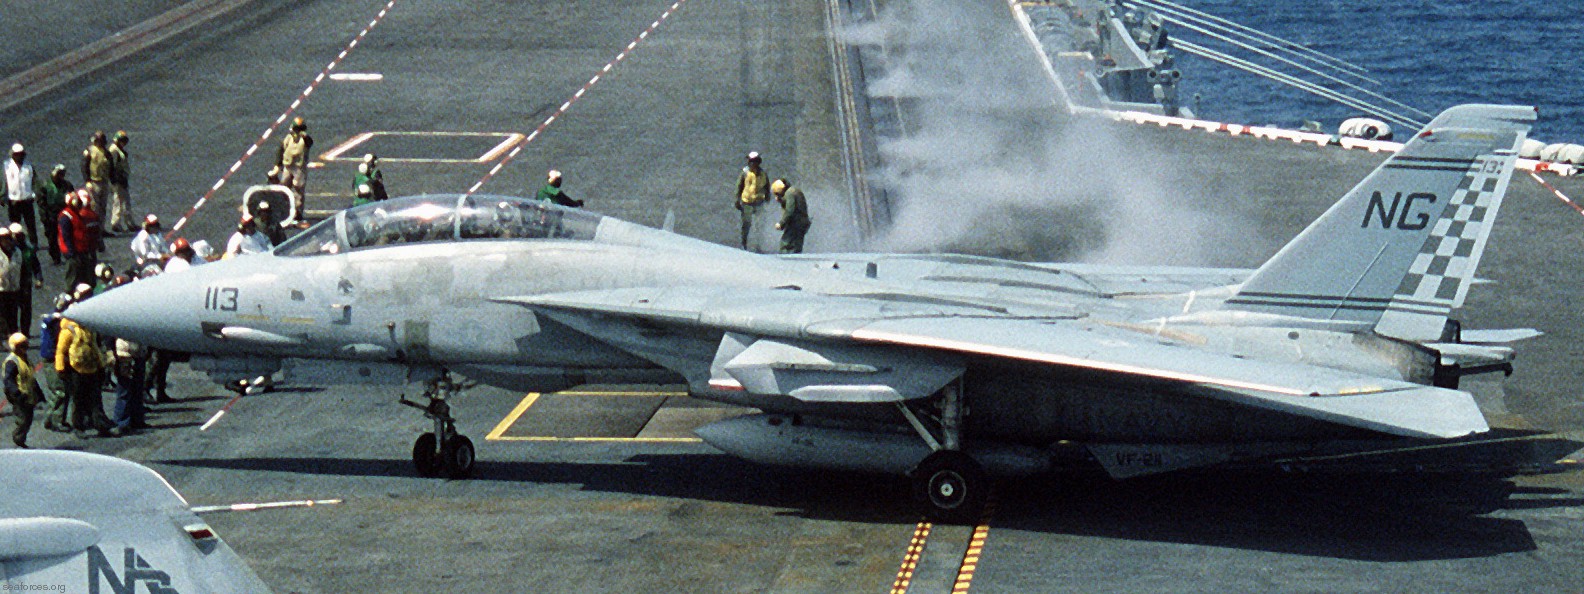 vf-211 fighting checkmates fighter squadron f-14a tomcat us navy carrier air wing cvw-9 uss nimitz cvn-68 31